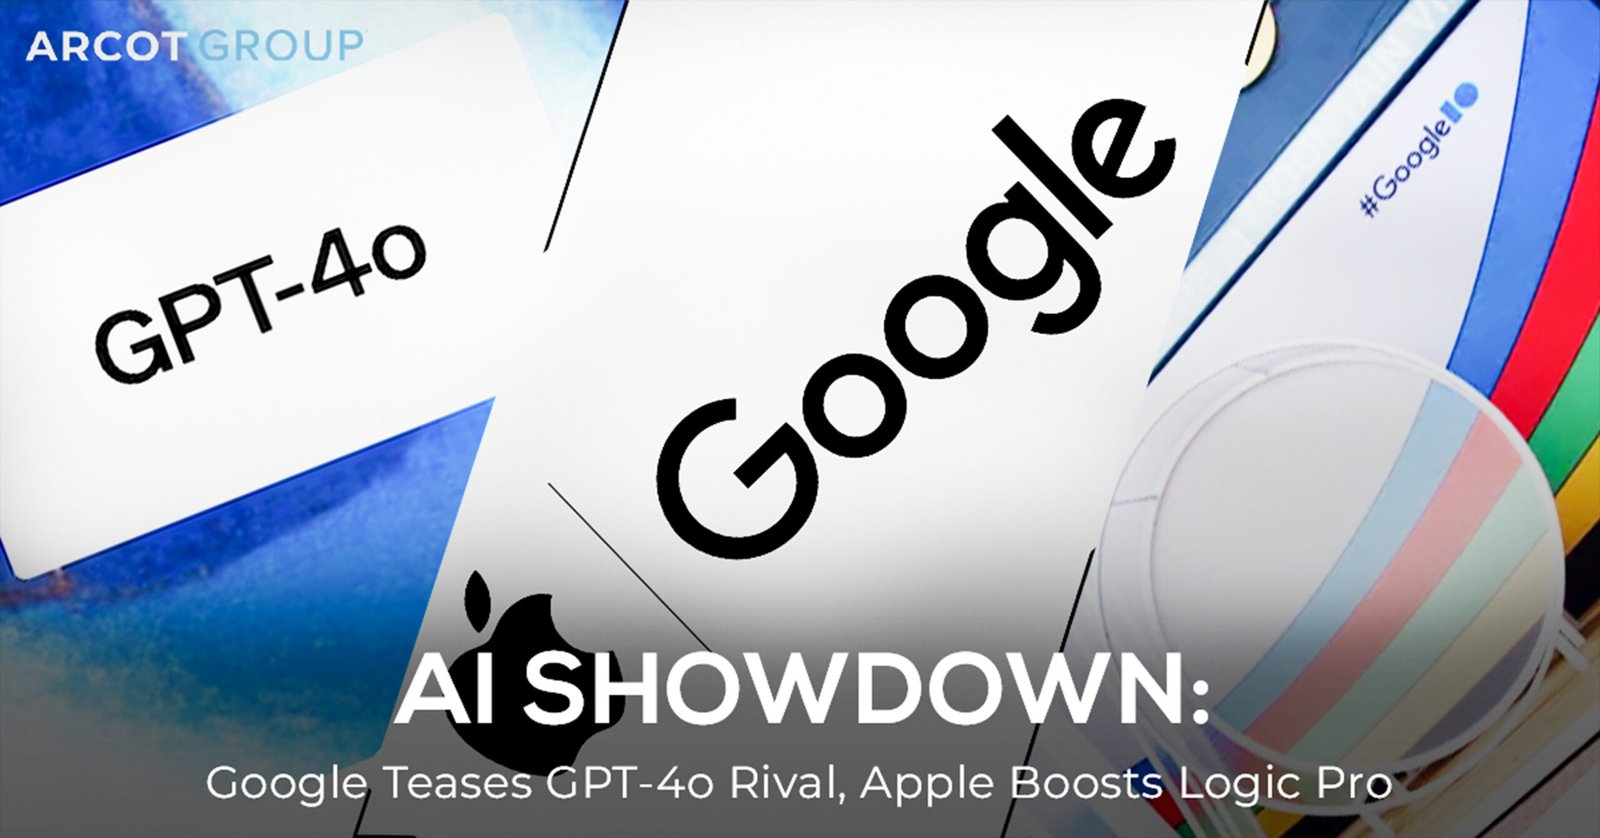 "Promotional banner for Arcot Group titled 'AI SHOWDOWN: Google Teases GPT-4o Rival, Apple Boosts Logic Pro.' Features a collage of logos including GPT-4o, Google, and Apple, with a colorful background symbolizing tech innovation."